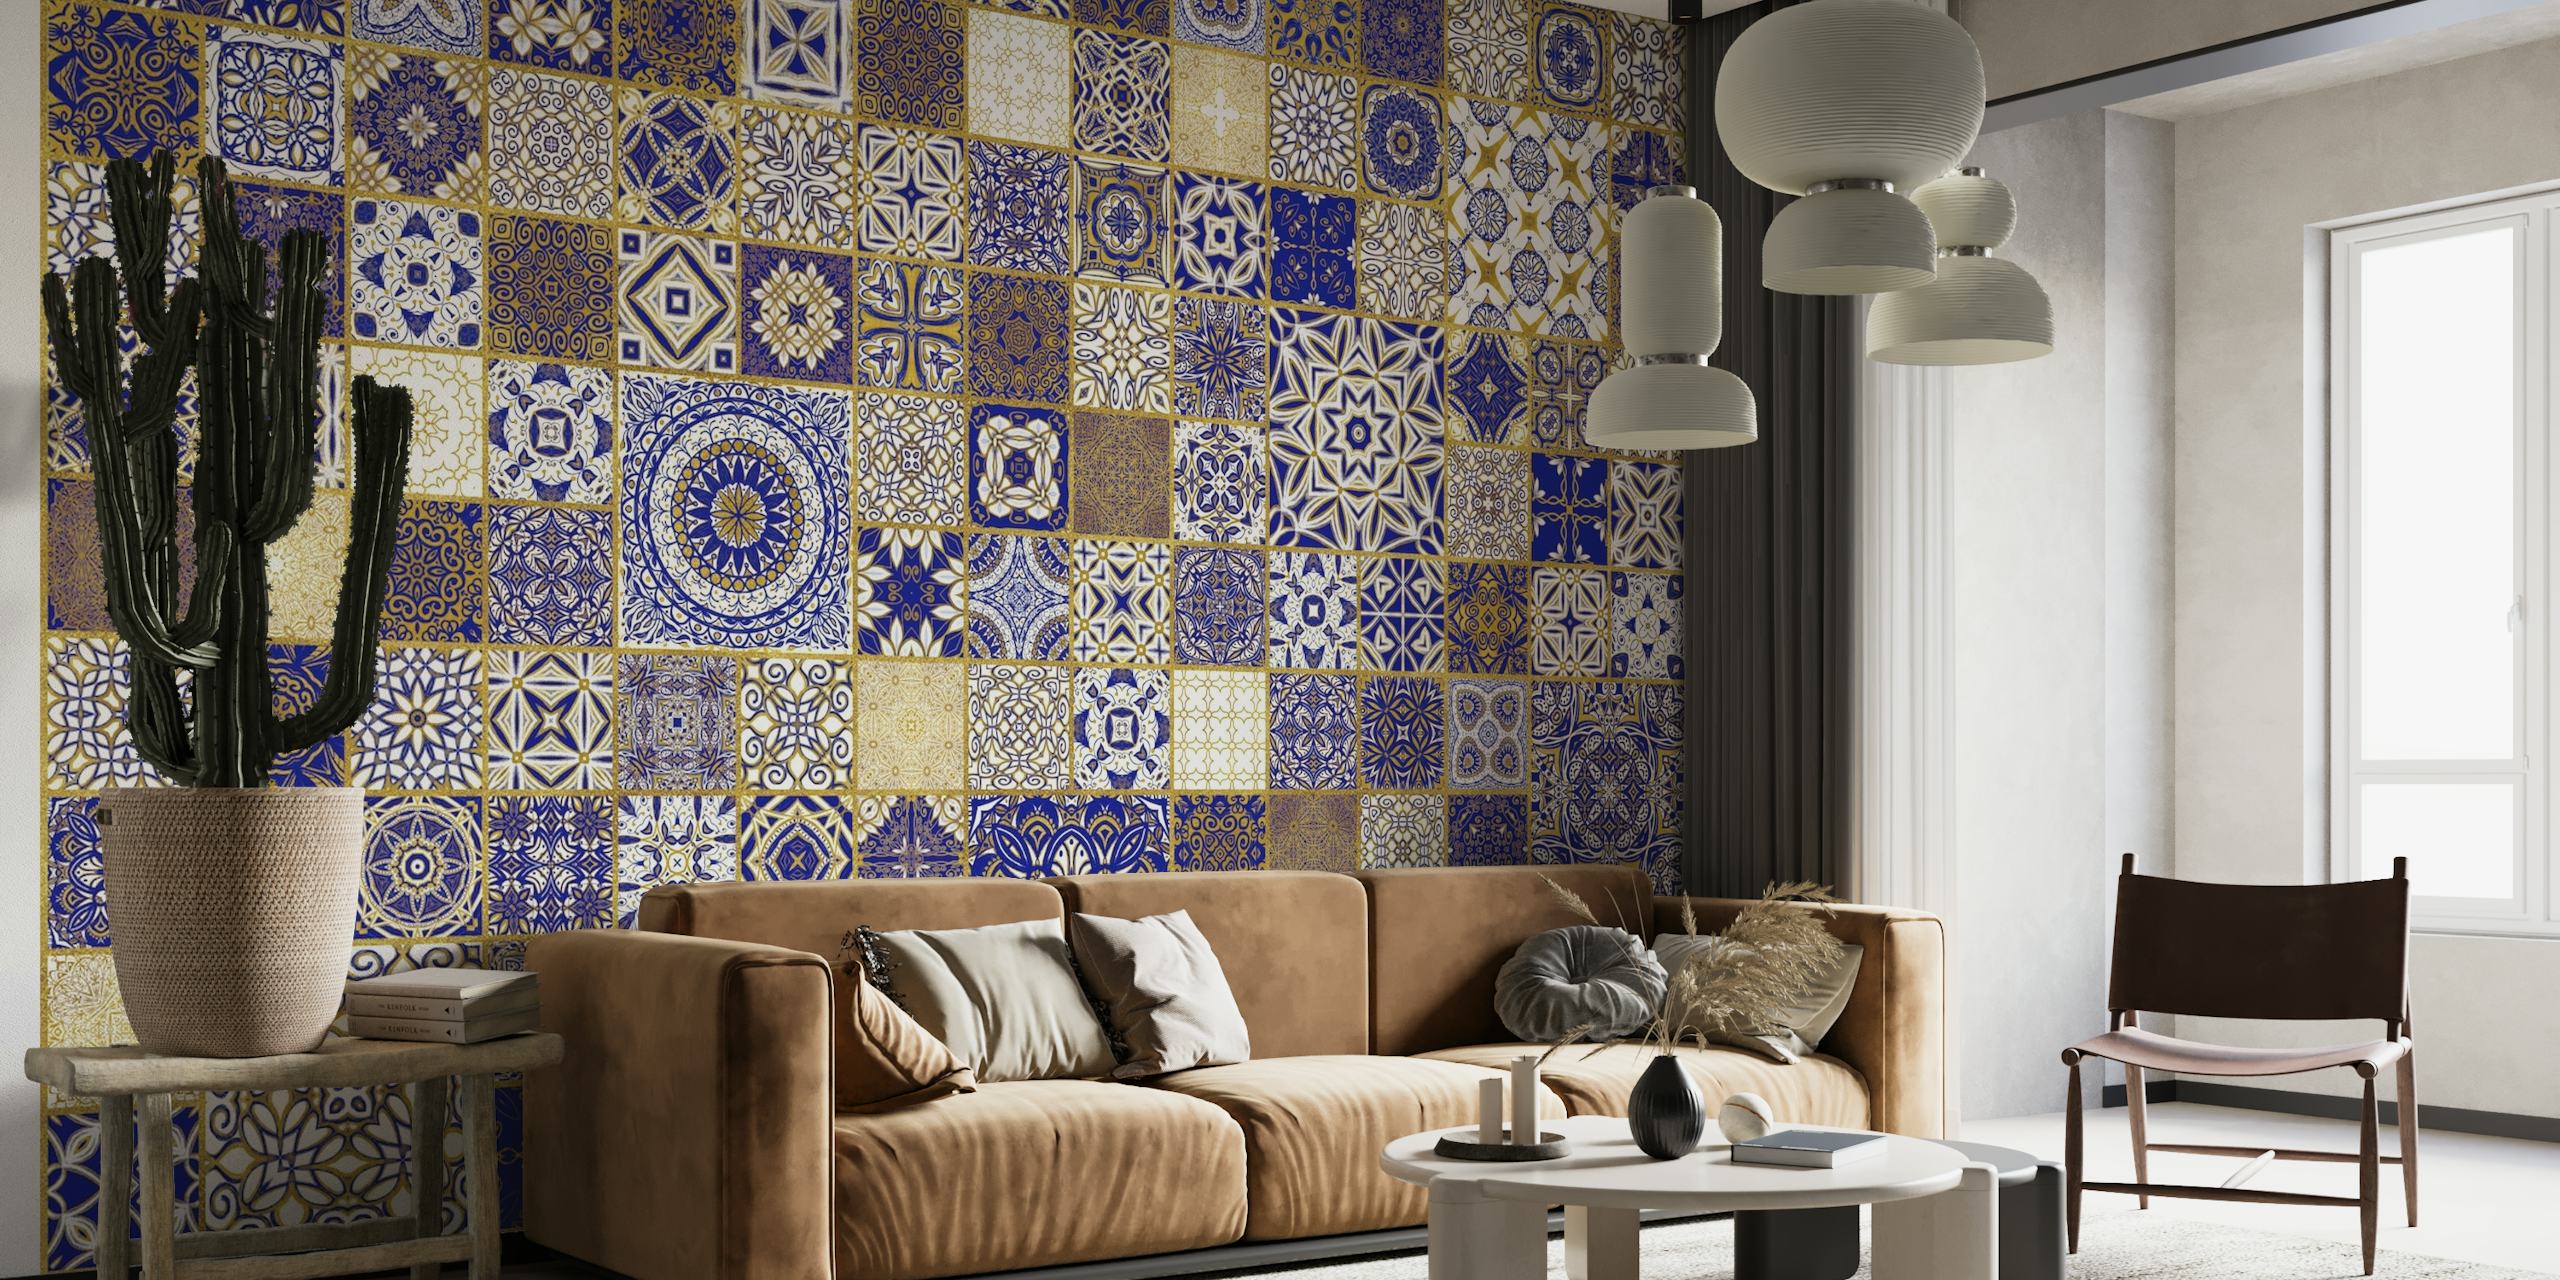 Blue, gold, and white vintage tile patterns wall mural